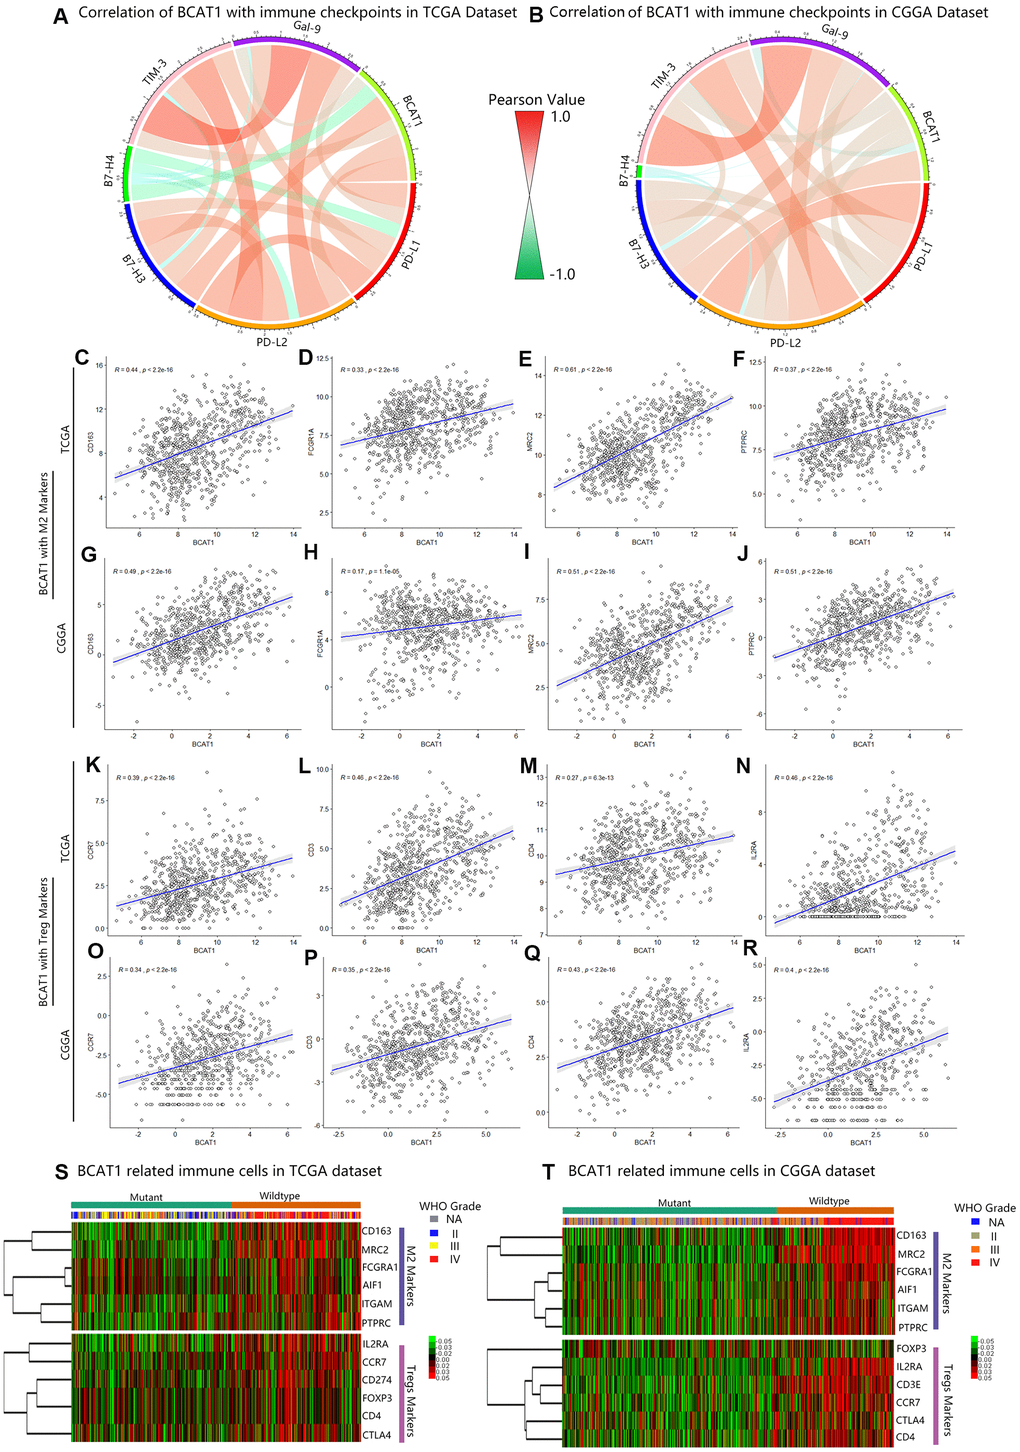 BCAT1 is correlated with immunosuppressive status in gliomas. (A, B) The correlation between BCAT1 and immune checkpoints in the TCGA and CGGA datasets. (C–F) The correlation between BCAT1 and M2 markers in the TCGA dataset and (G–J) CGGA dataset. (K–N) The correlation between BCAT1 and Treg markers in the TCGA dataset and (O–R) CGGA dataset. (S, T) Heatmap showing the mRNA expression pattern of BCAT1 related immune cell markers in the TCGA and CGGA datasets, shown respectively for IDH1 mutant and wild-type gliomas and for glioma grades.